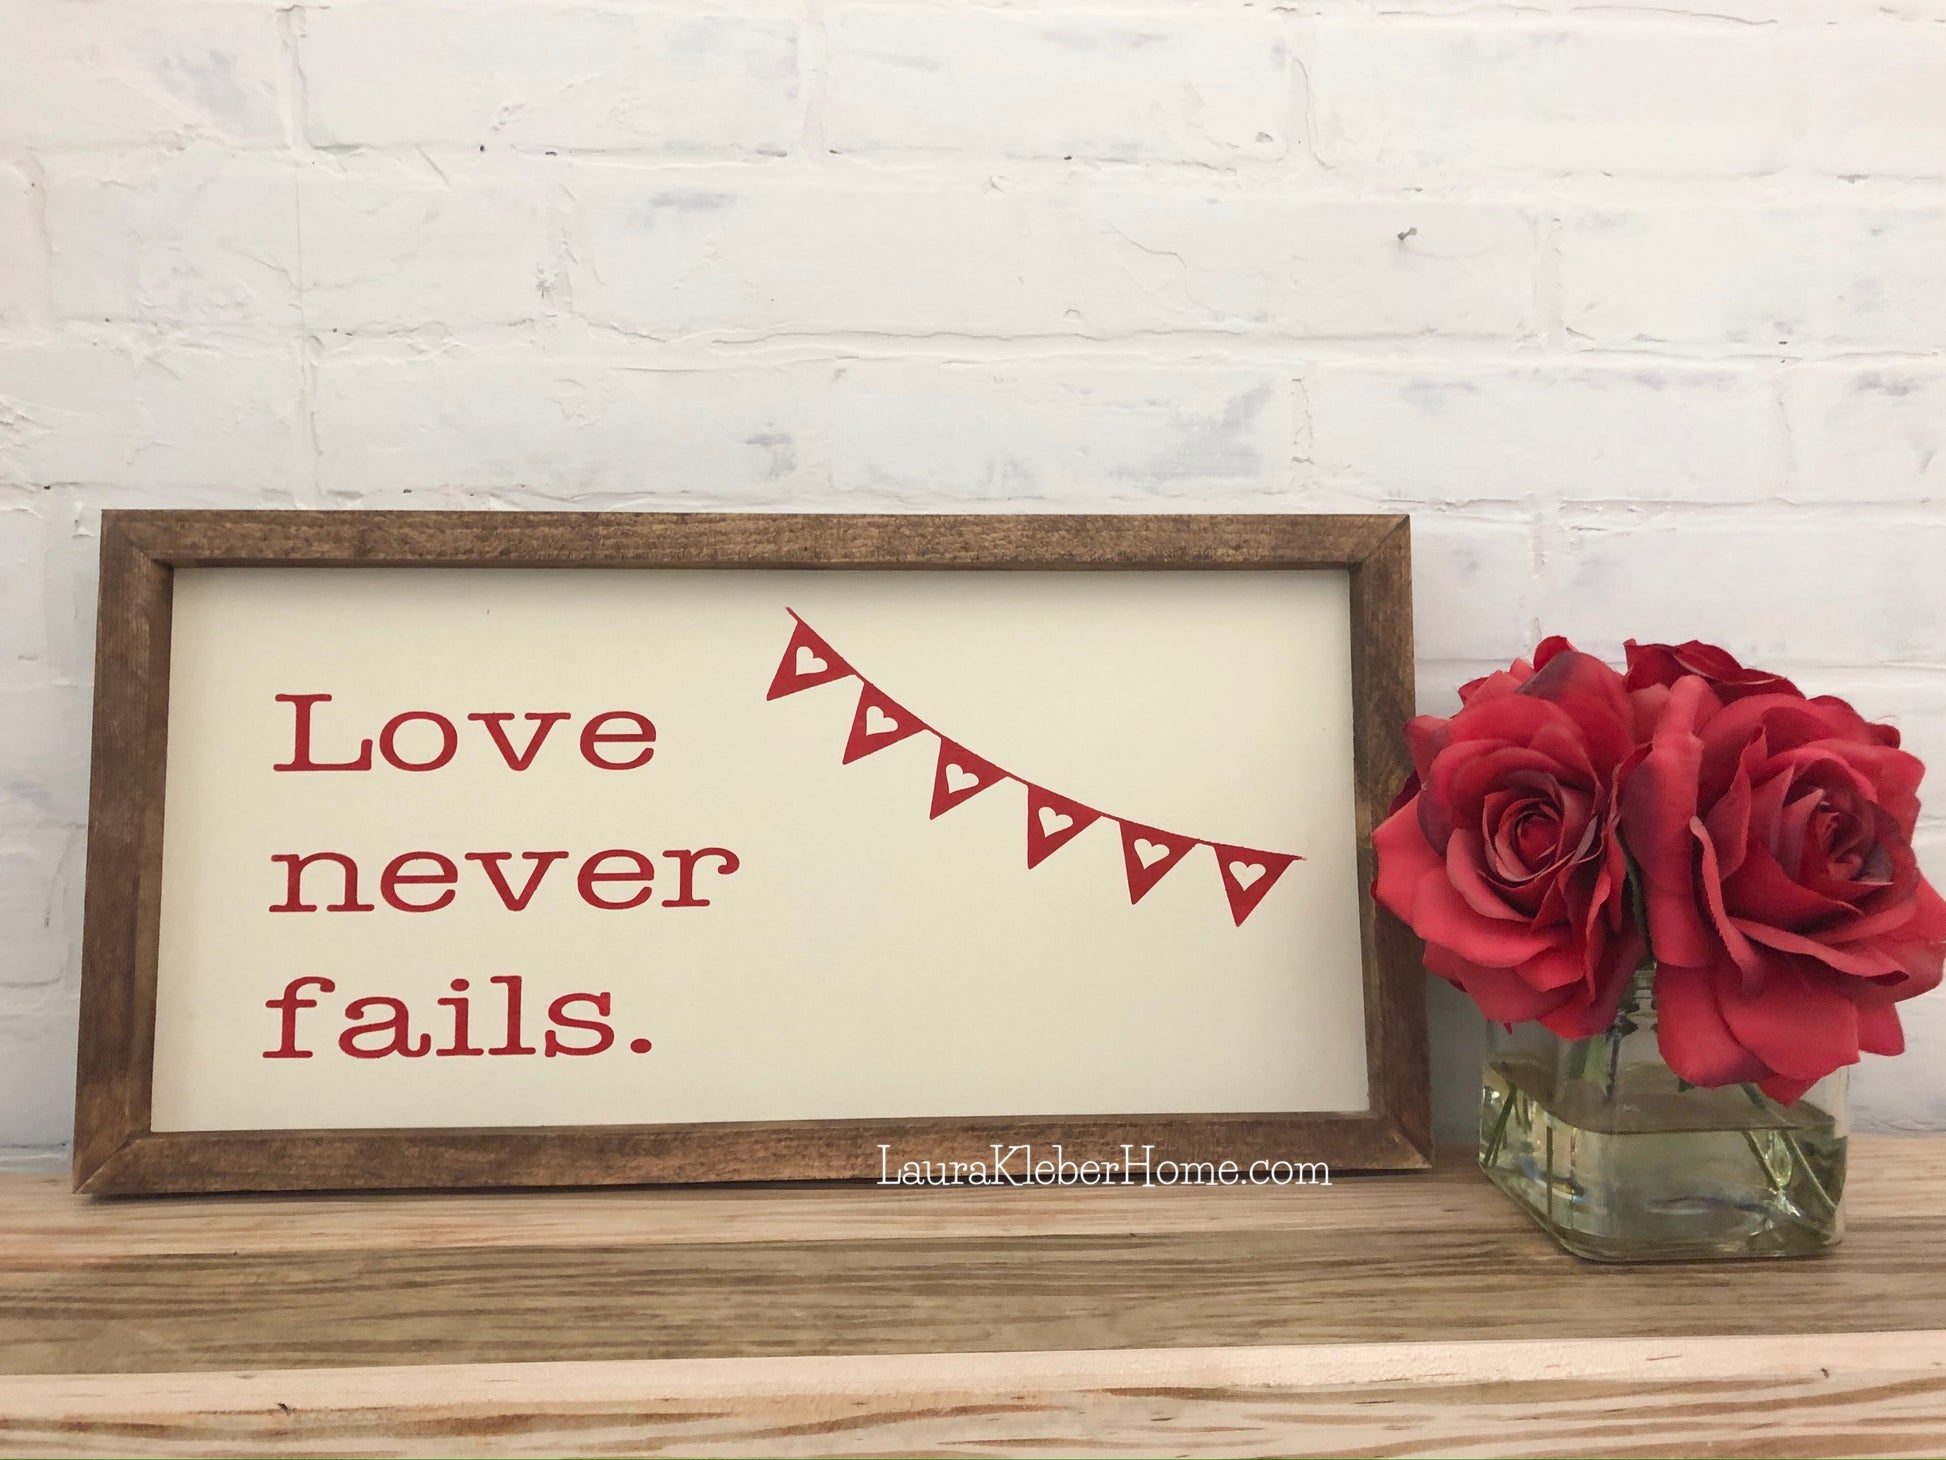 A 10x18 inch framed wood sign with love never fails painted in red with a white background.